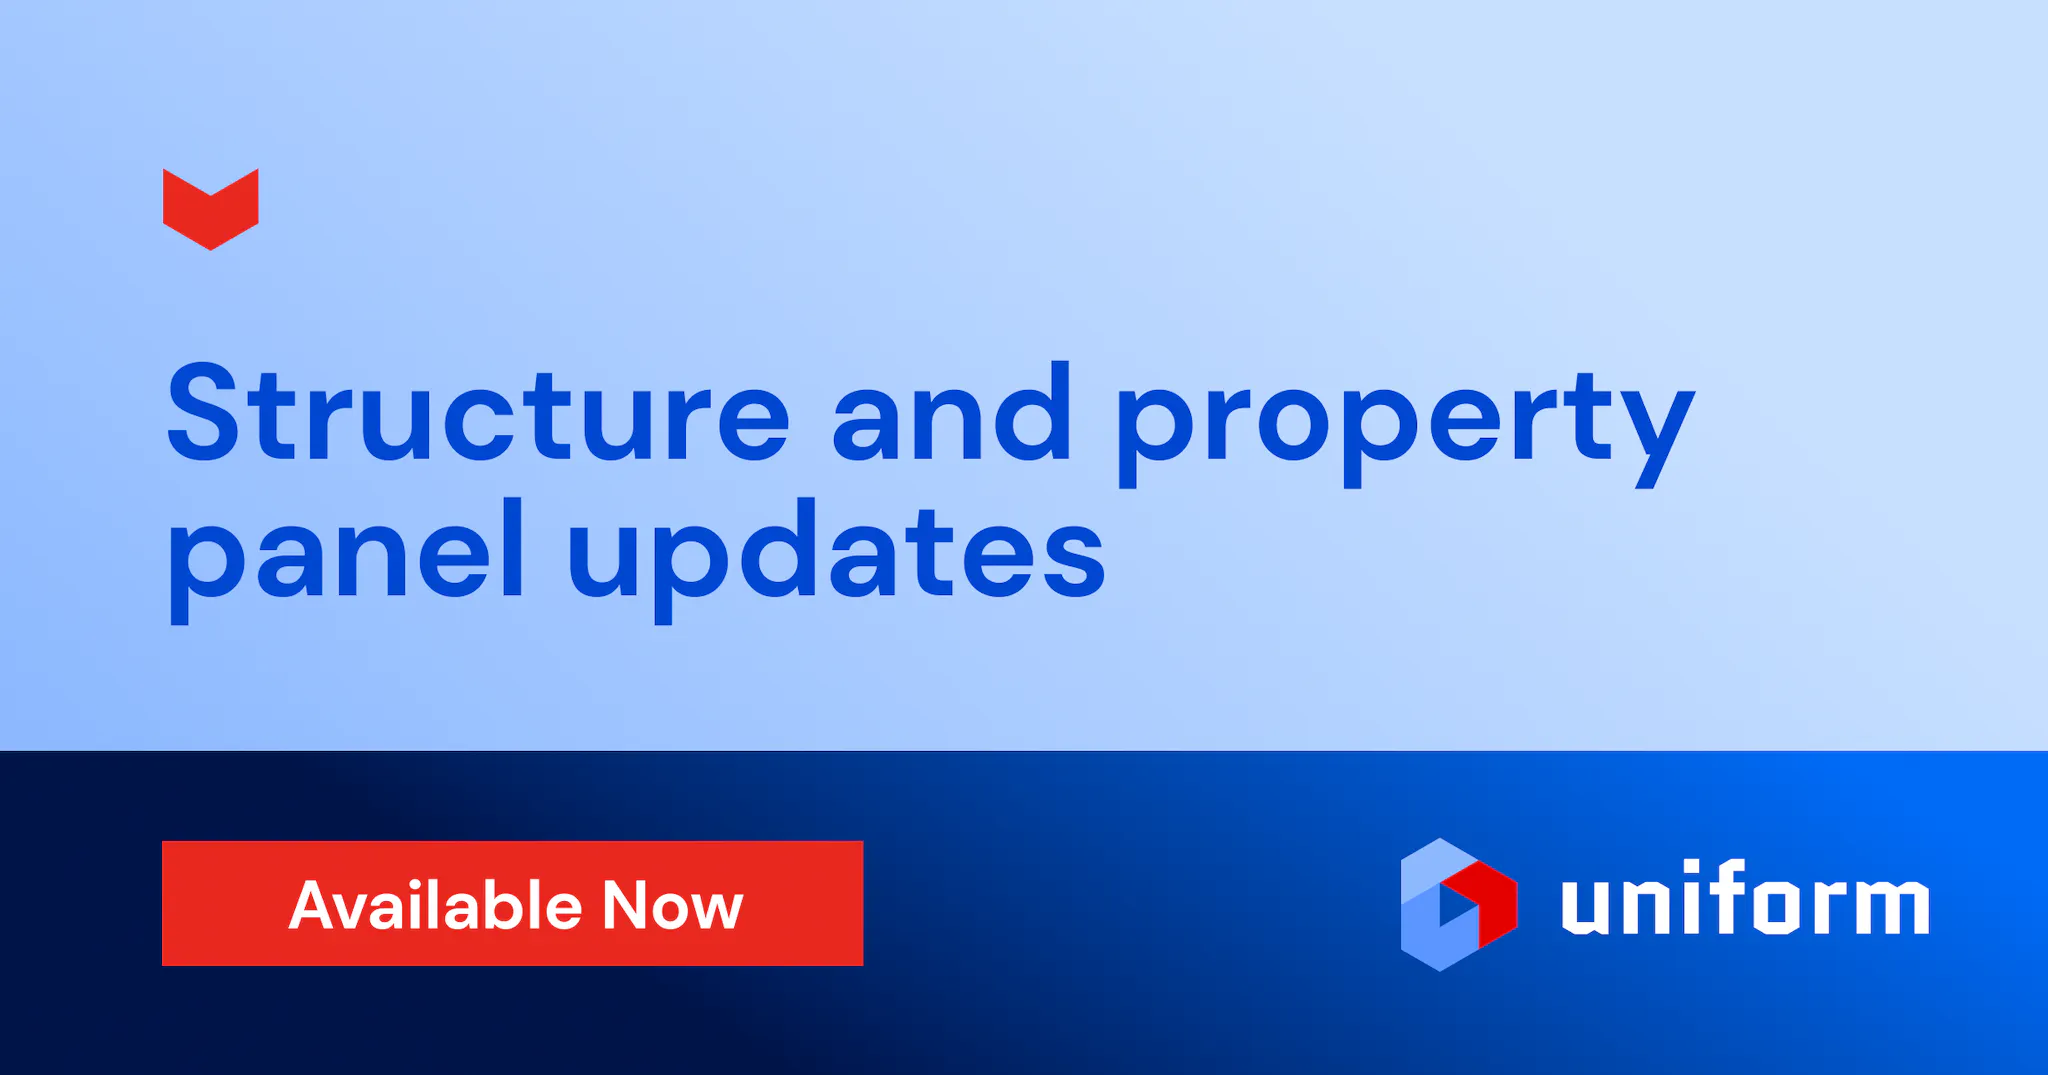 Structure and property panel updates